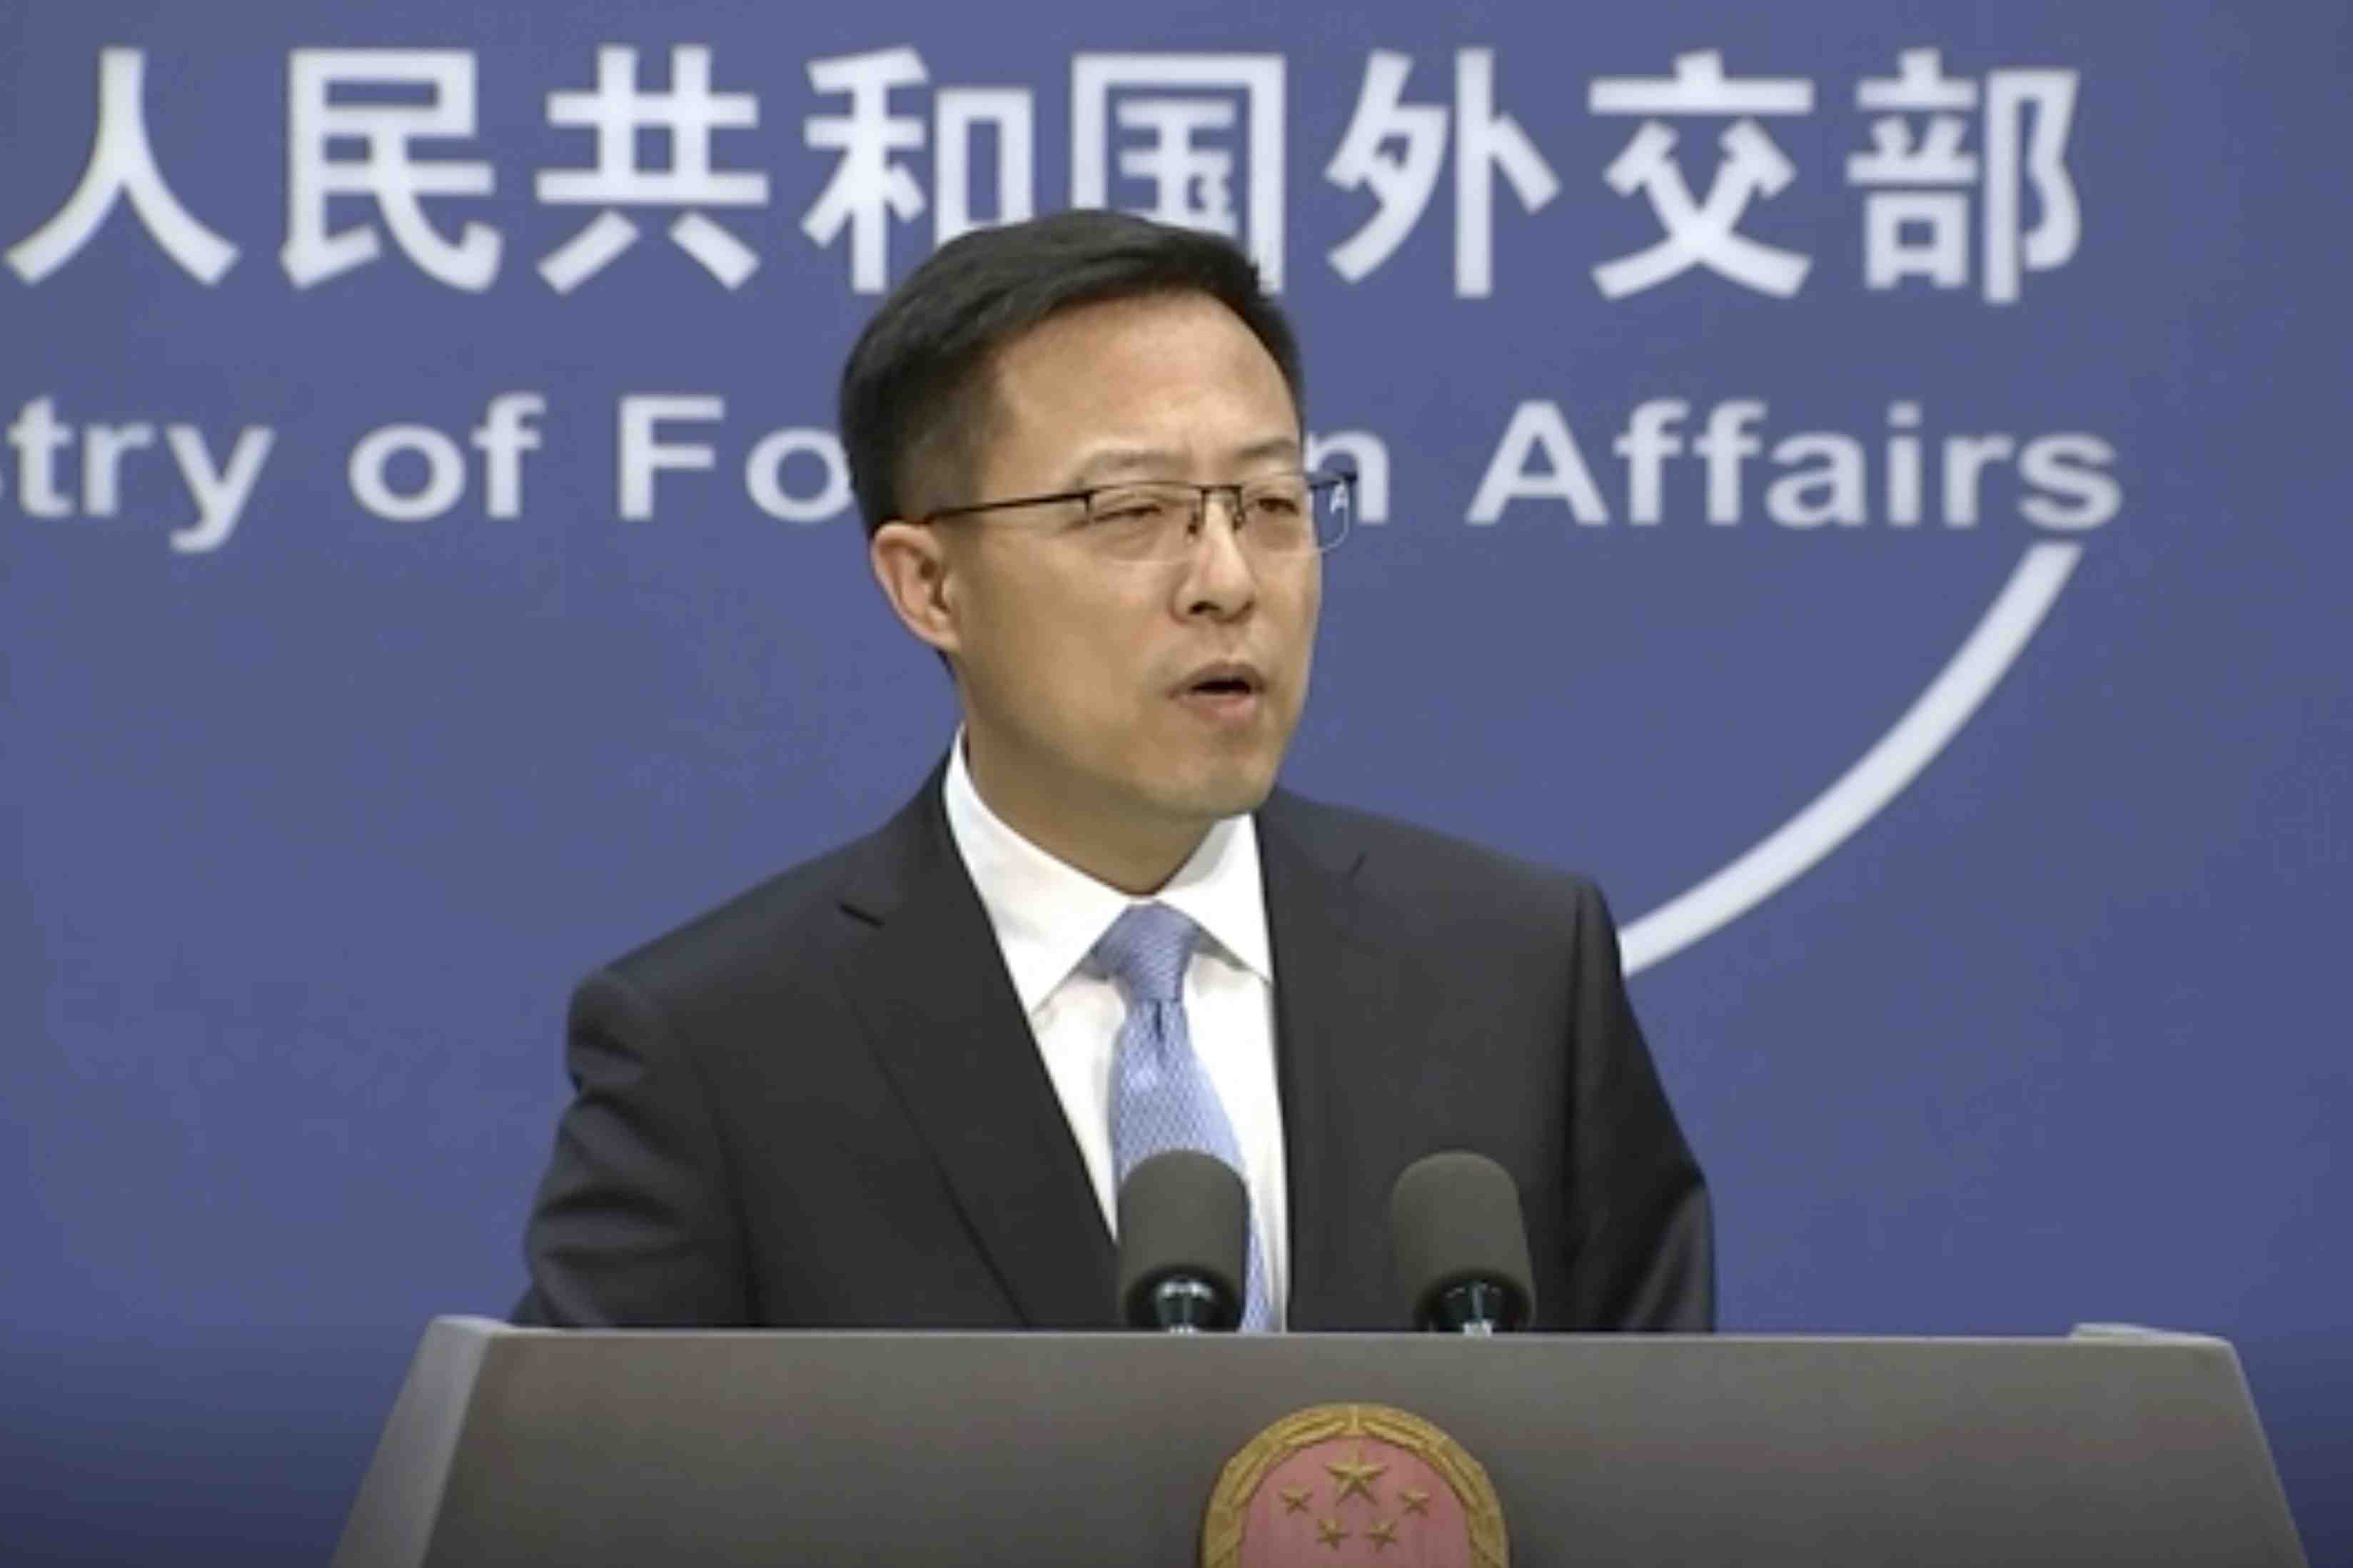 In this image from video, Chinese Foreign Ministry spokesperson Zhao Lijian speaks at a briefing in Beijing Tuesday, Nov. 17, 2020. Lijian said Australia should do something “to promote mutual trust and cooperation” between the two countries, in response to the call from Australia’s trade minister Simon Birmingham for dialogue and discussion with China to stop the trade disruptions over tensions. Australia is the first country to ban China's Huawei from its 5G network and Canberra led a global effort calling for an independent probe into the origins of the COVID-19 pandemic, which first emerged in China’s Wuhan city. (AP Photo)